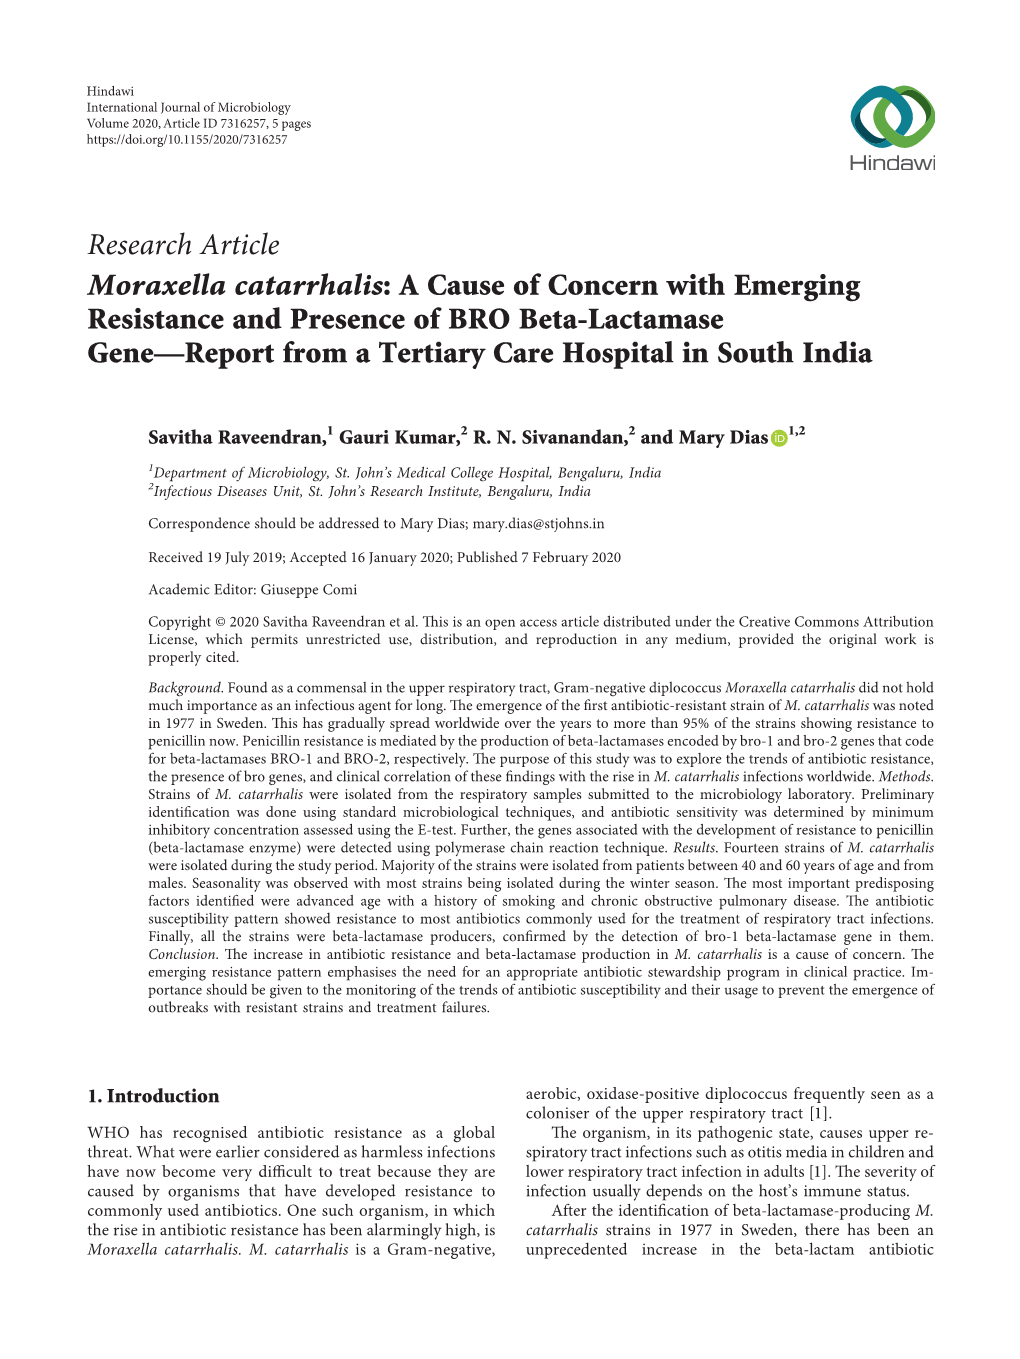 Moraxella Catarrhalis: a Cause of Concern with Emerging Resistance and Presence of BRO Beta-Lactamase Gene—Report from a Tertiary Care Hospital in South India